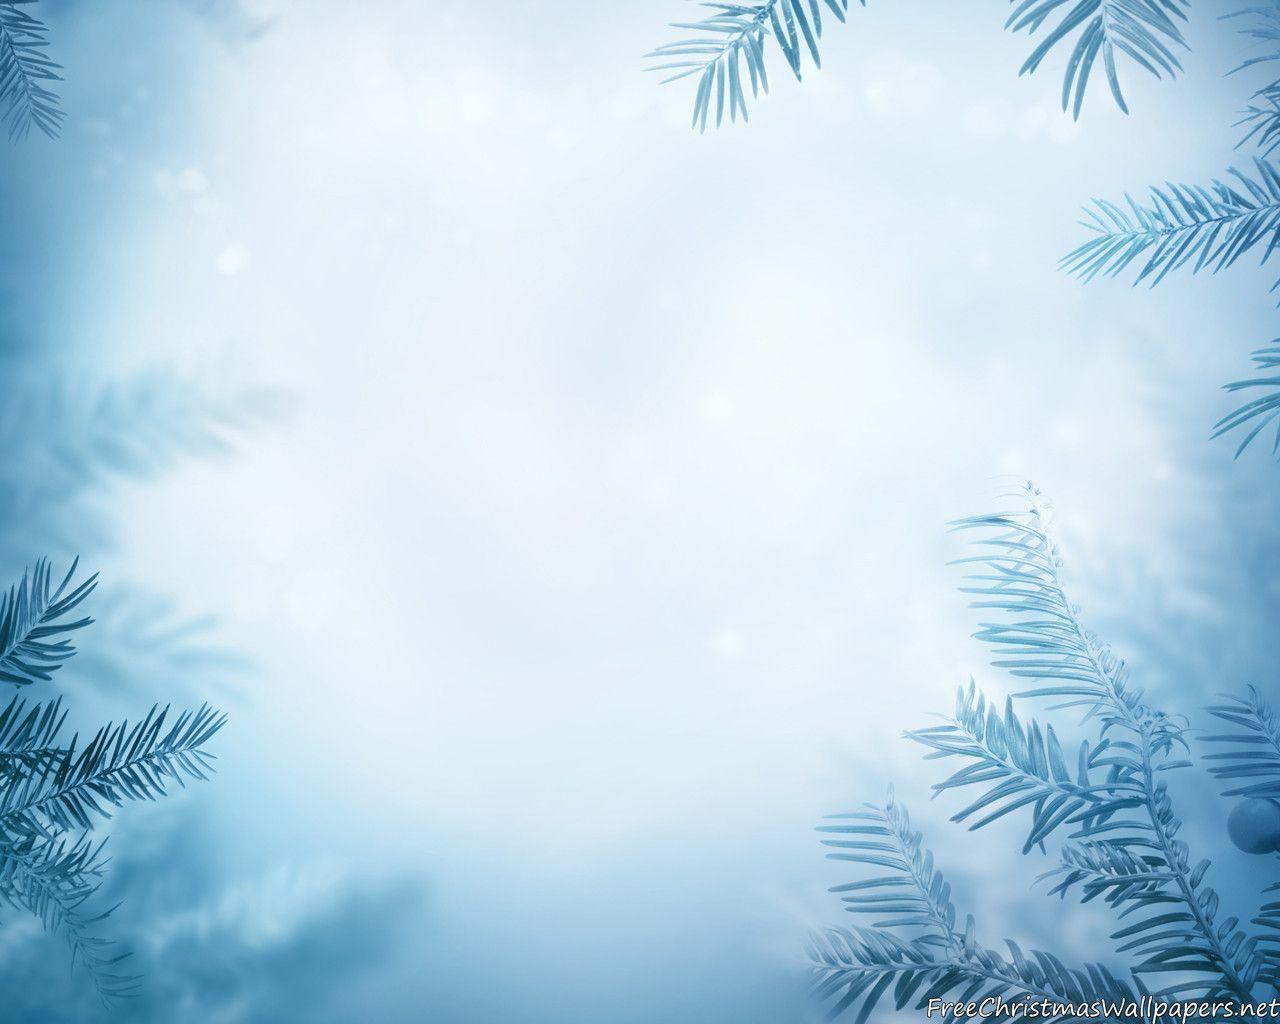 Winter Background with Frozen Trees Wallpaper